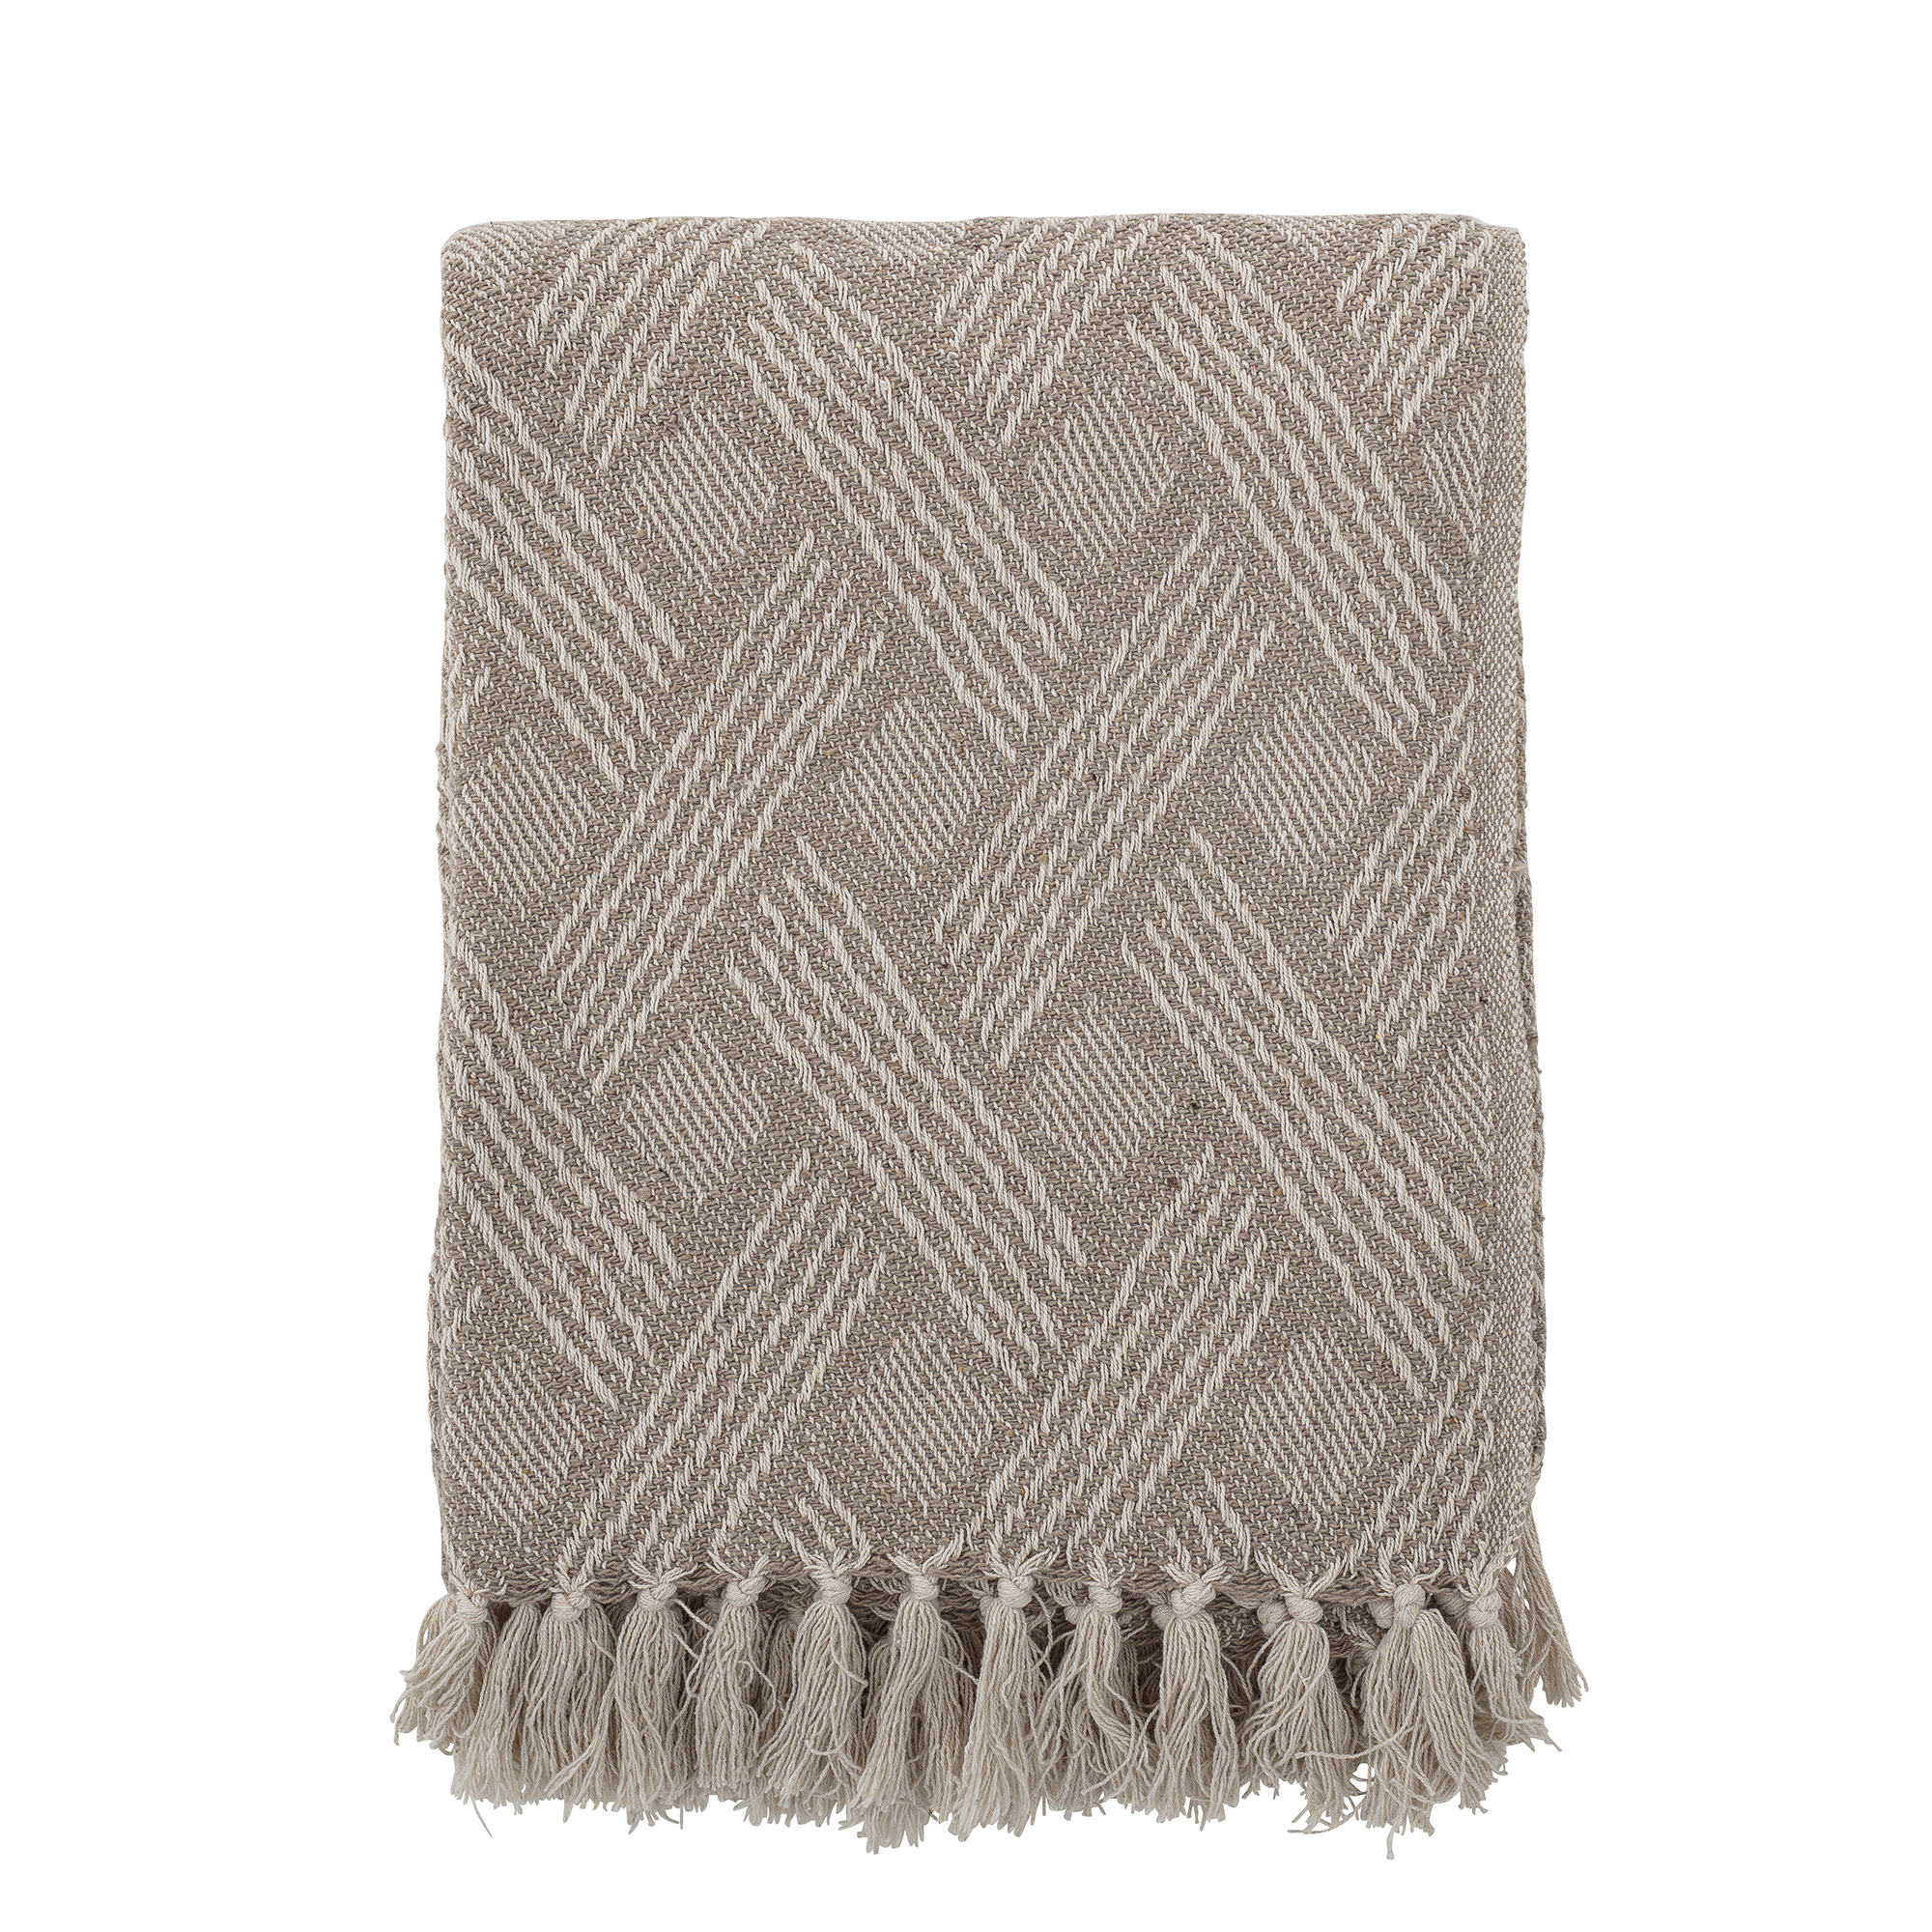 Bloomingville Recycled Cotton Blanket with Diagonal Lines and Fringes in Beige Colour